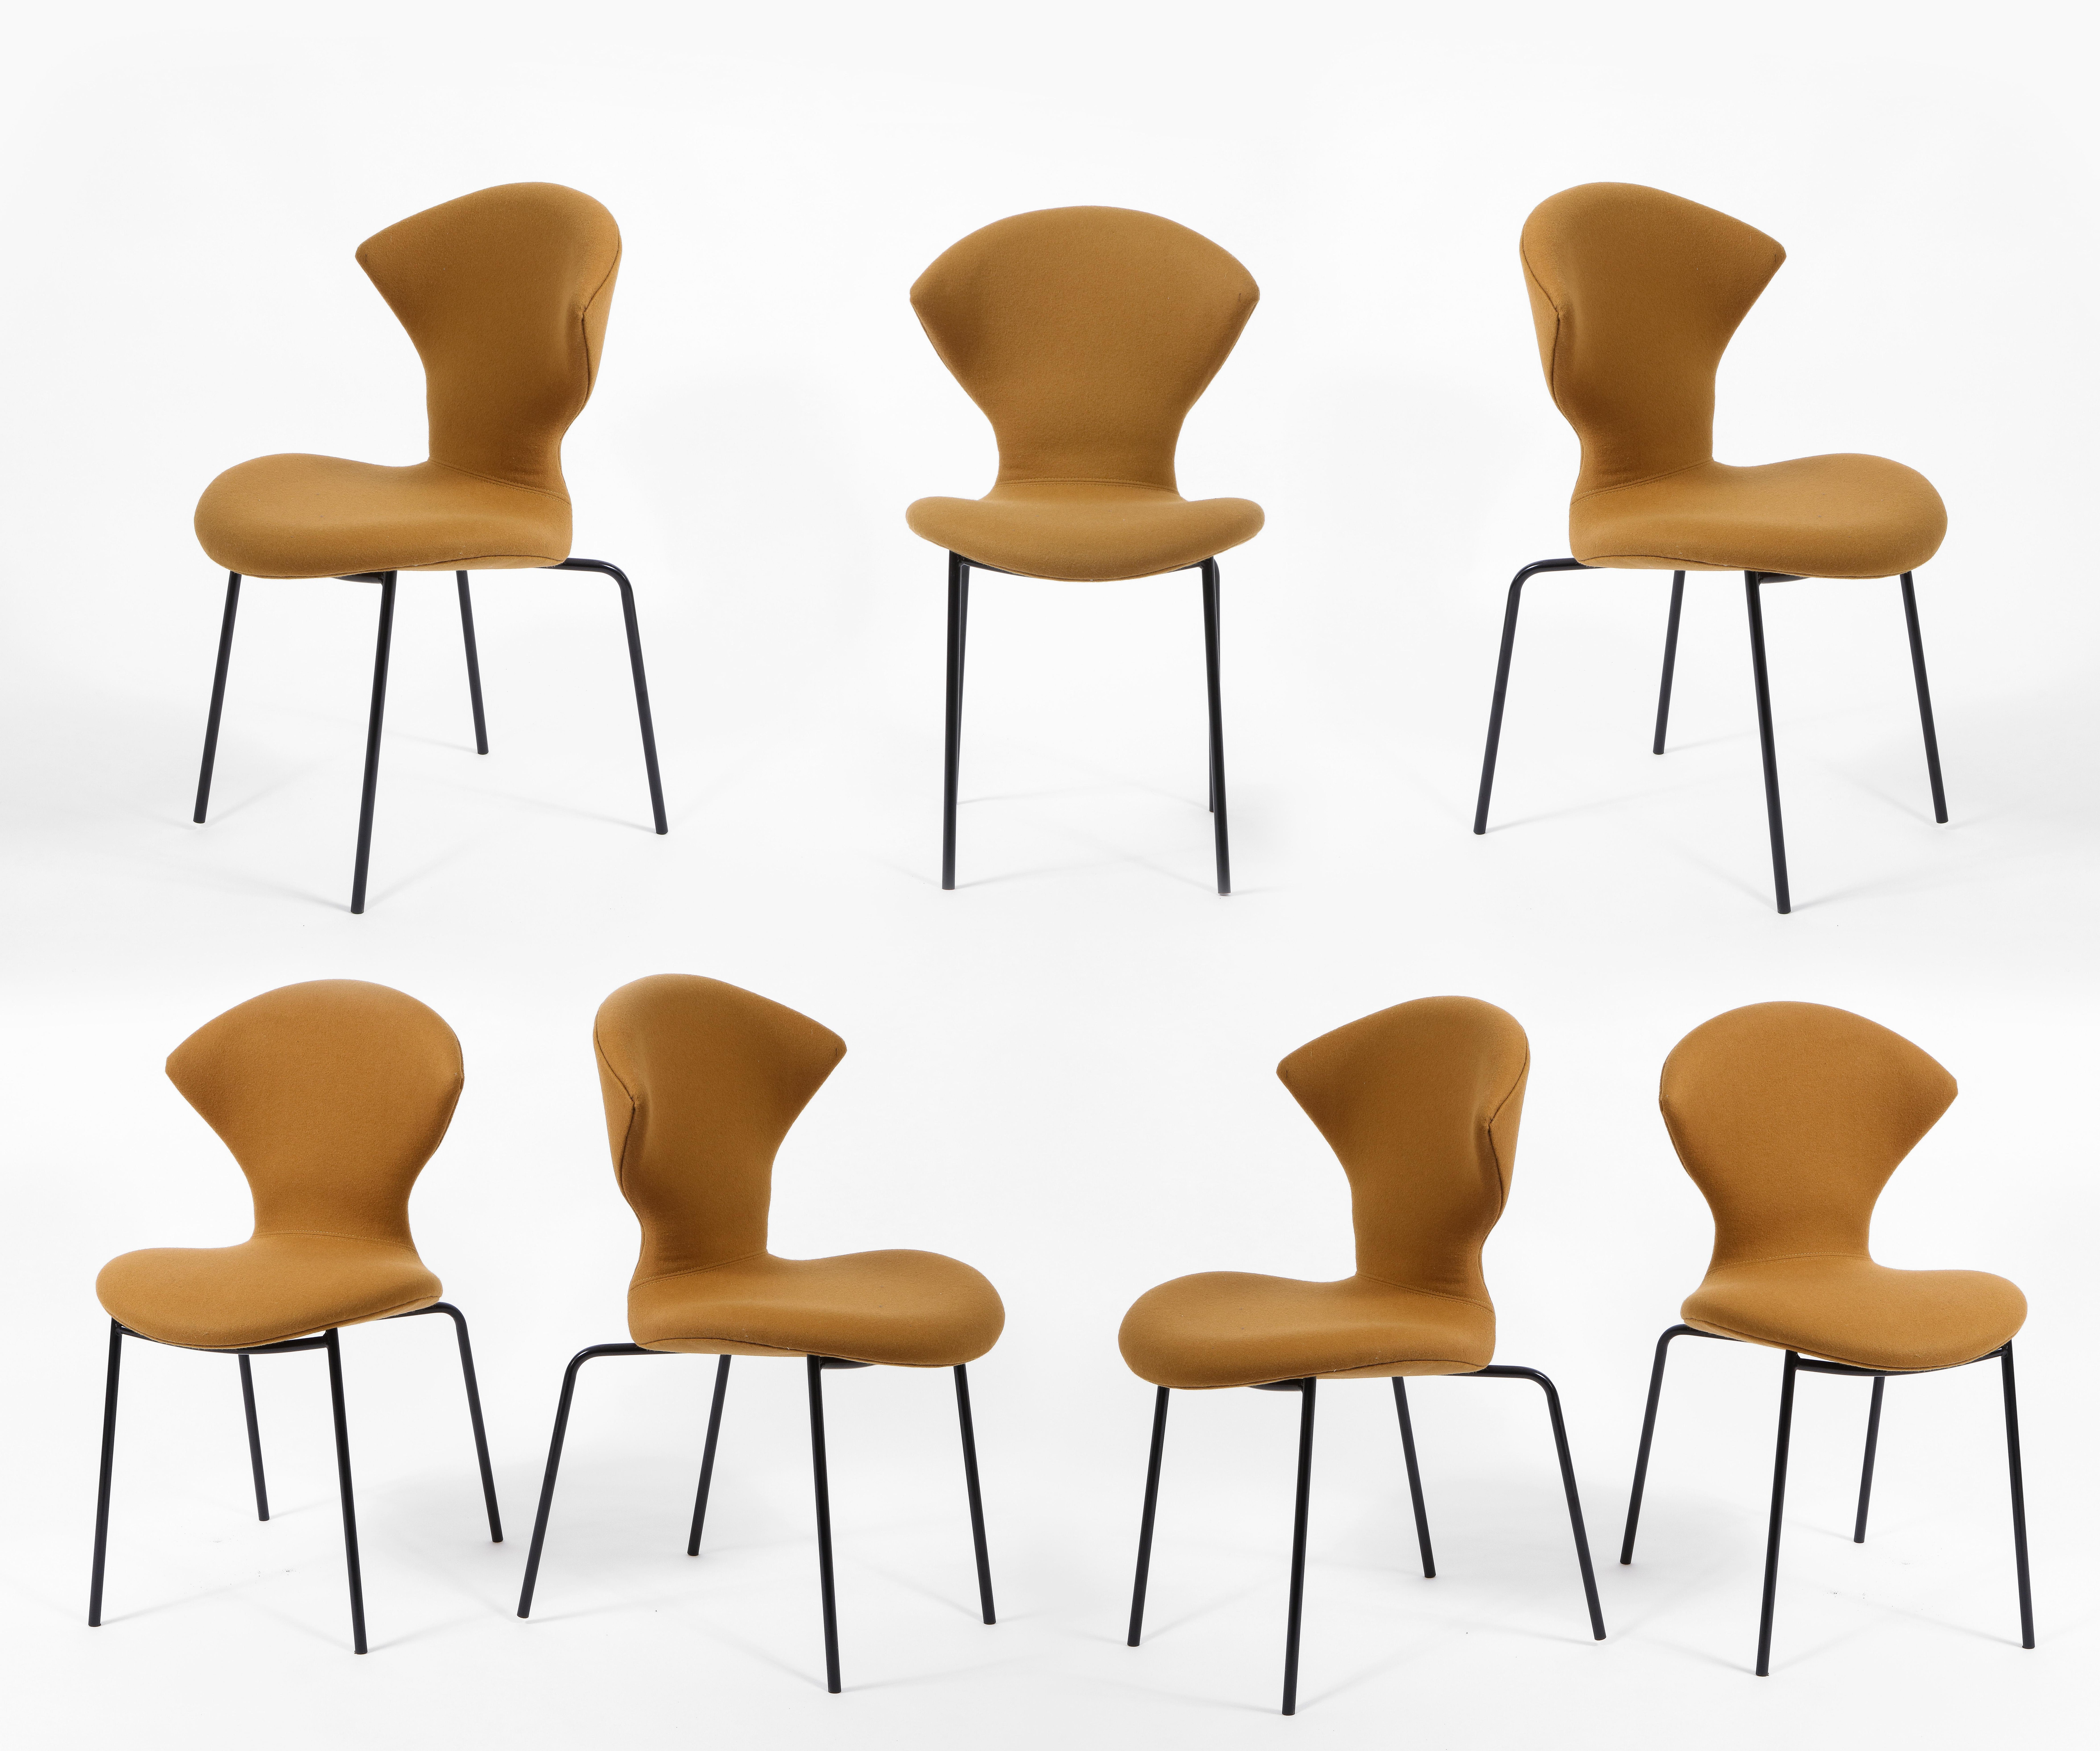 An important set of 10 dining chairs by Genevieve Dangles and Christian DeFrance for Strafor. The plywood seats are newly upholstered in a Maharam wool felt on black enameled iron legs. Important and strong set of chairs. Very comfortable. Light and